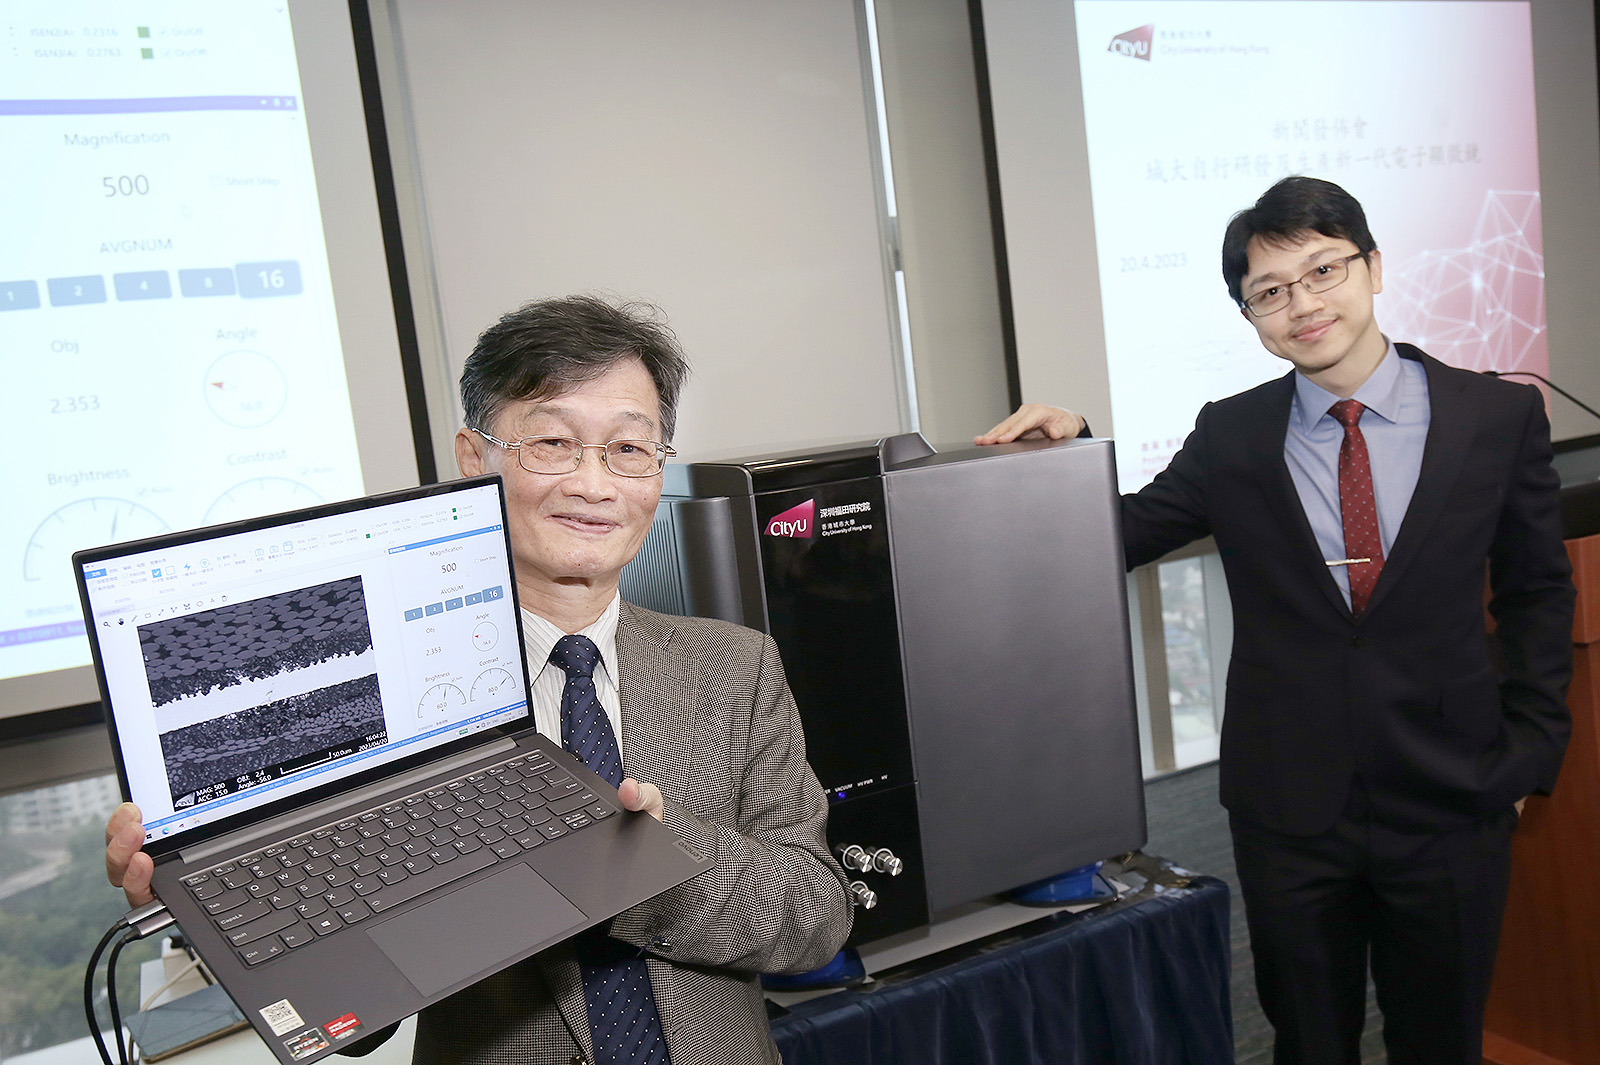 An electron microscope system composed of a pulsed electron source, a fast camera, a staged pumping vacuum system, and an aberration corrector has been developed by the research team.